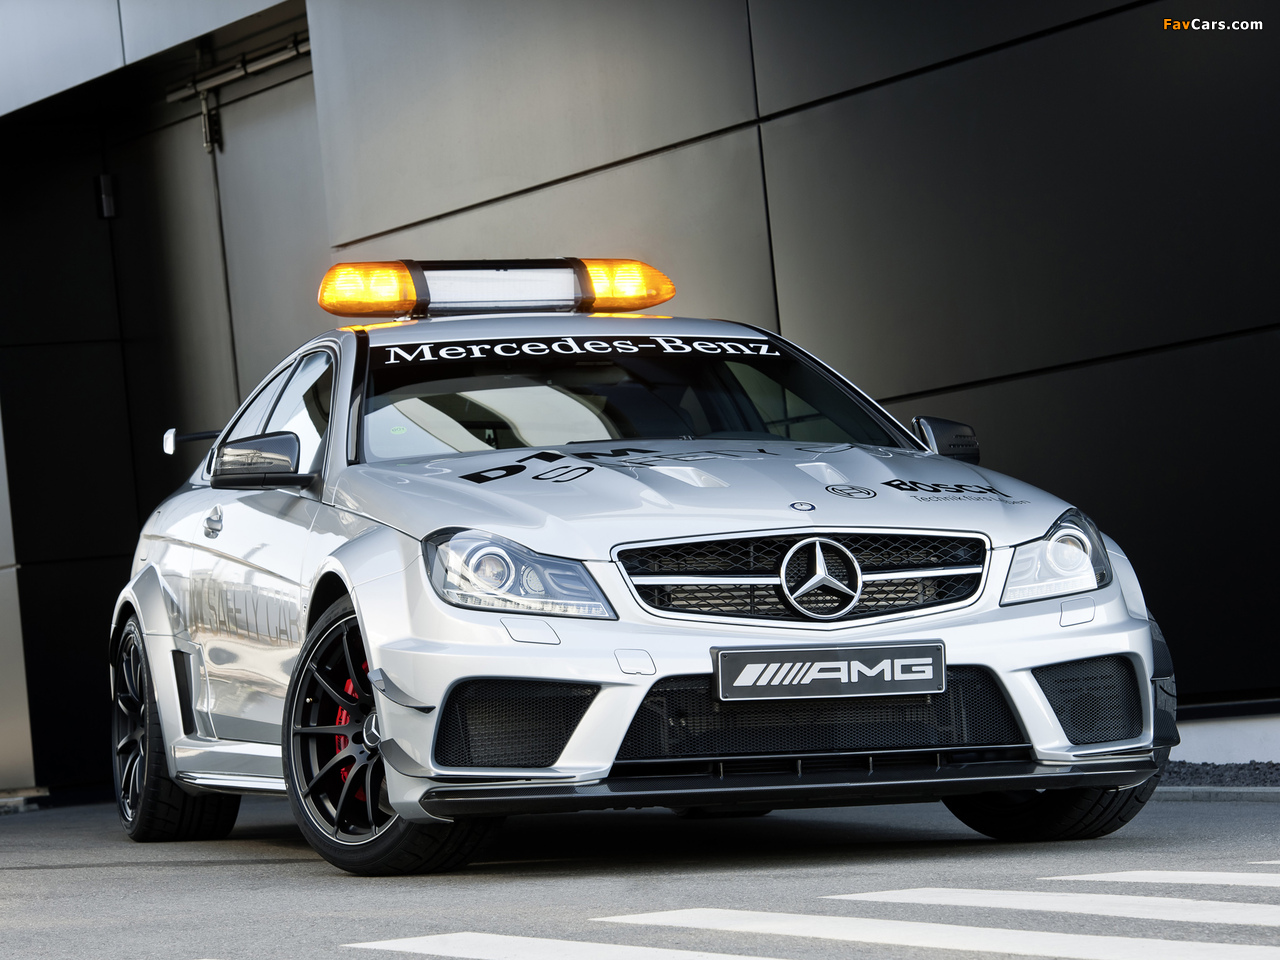 Mercedes-Benz C 63 AMG Black Series Coupe DTM Safety Car (C204) 2012 wallpapers (1280 x 960)